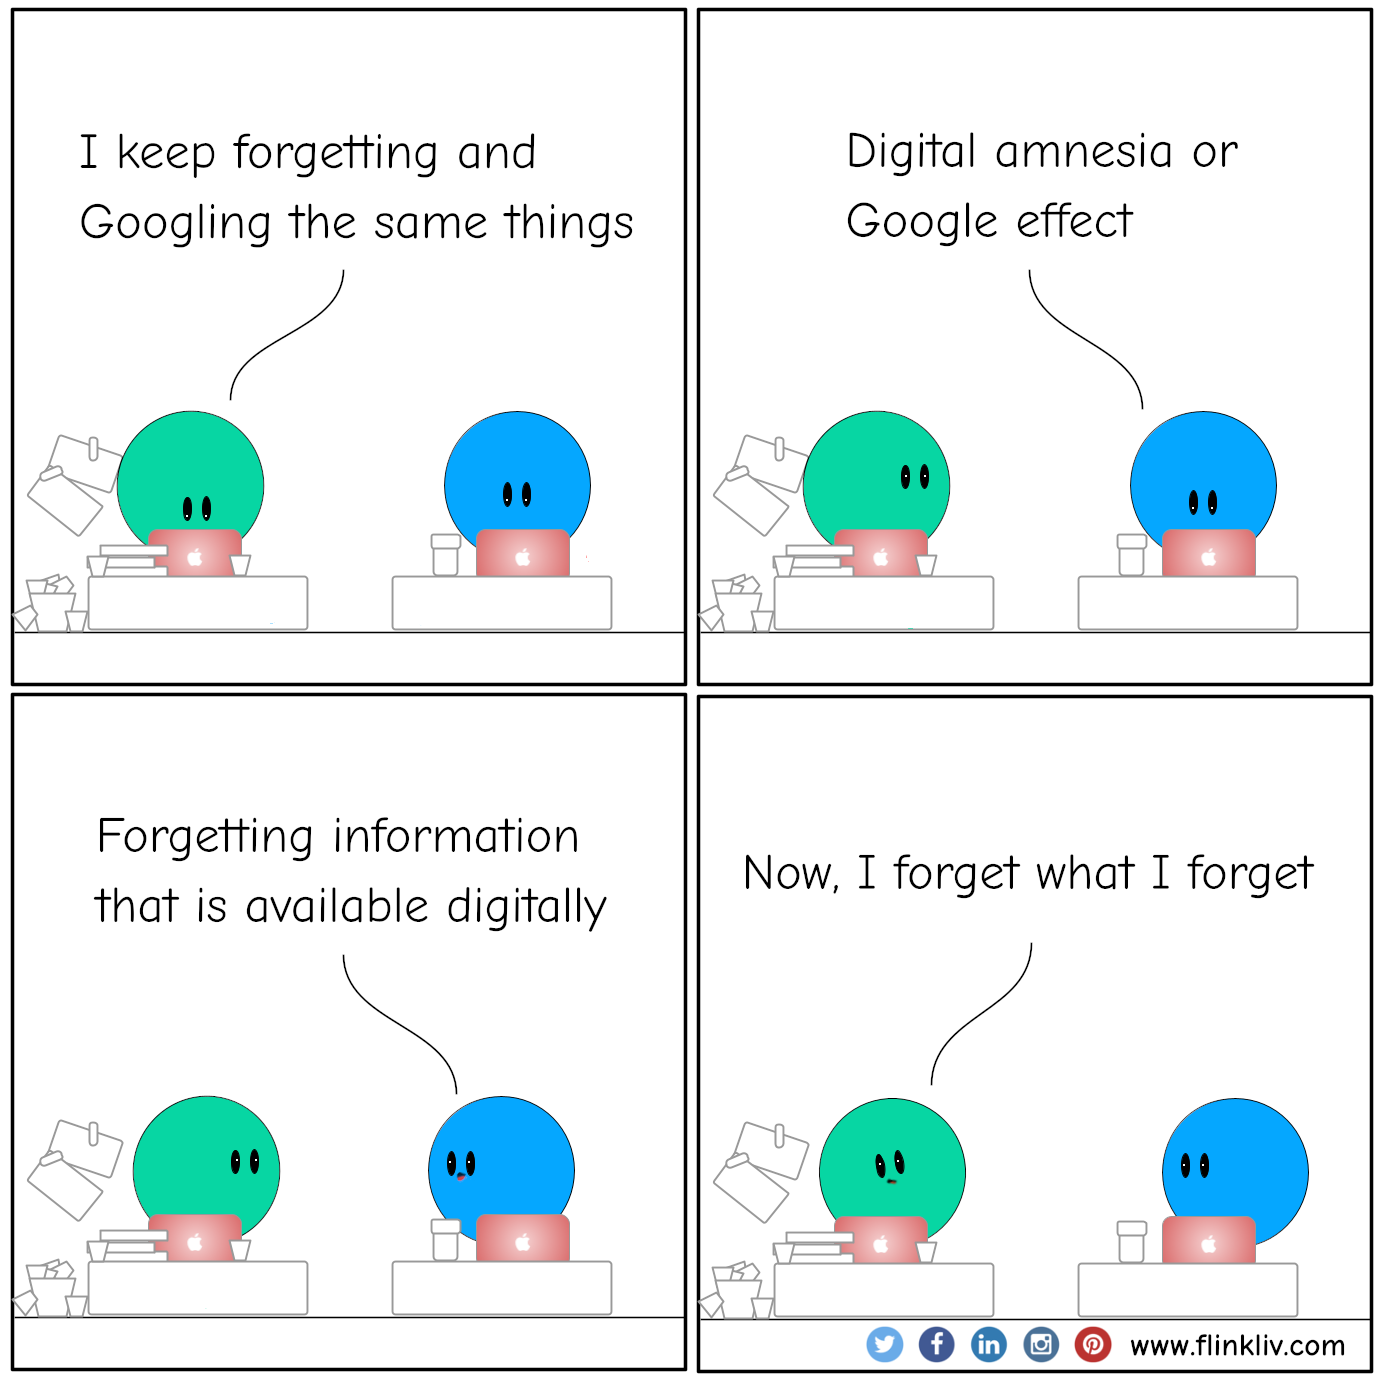 Conversation between A and B about Digital amnesia or Google effect A: I keep forgetting and Googling the same thing B: Digital amnesia or Google effect B: Forgetting information that is available digitally. A: Digital what? I will google it later A: Now, I forget what I forget By flinkliv.com